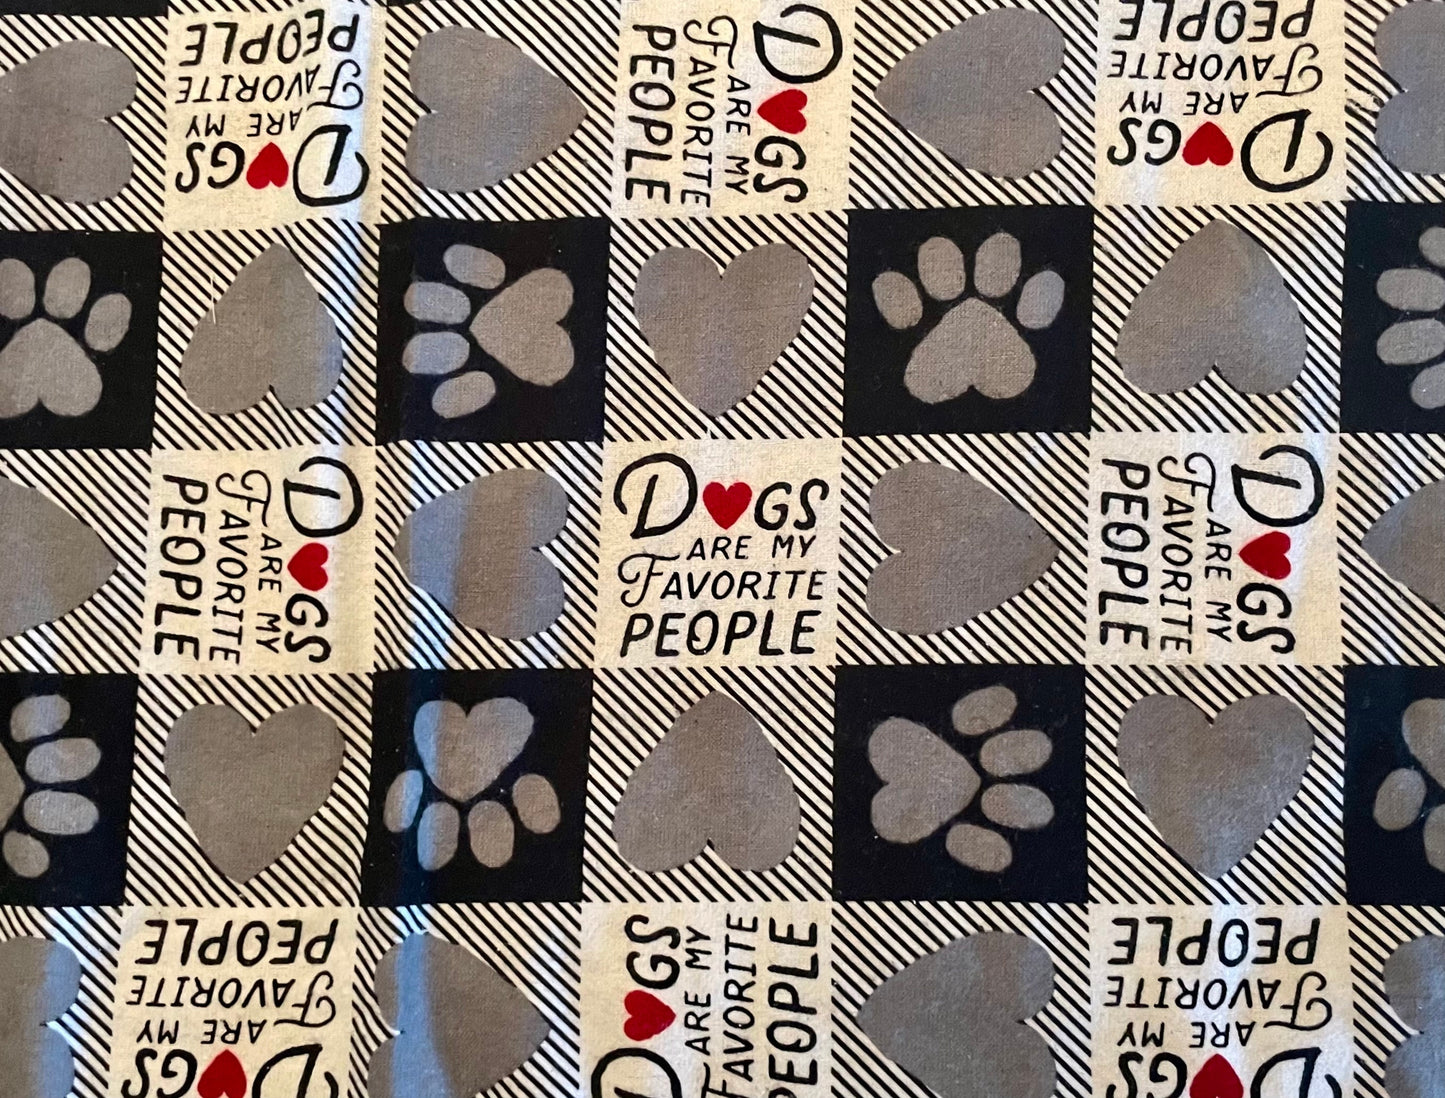 Dogs are my favorite people reversible blanket and gift